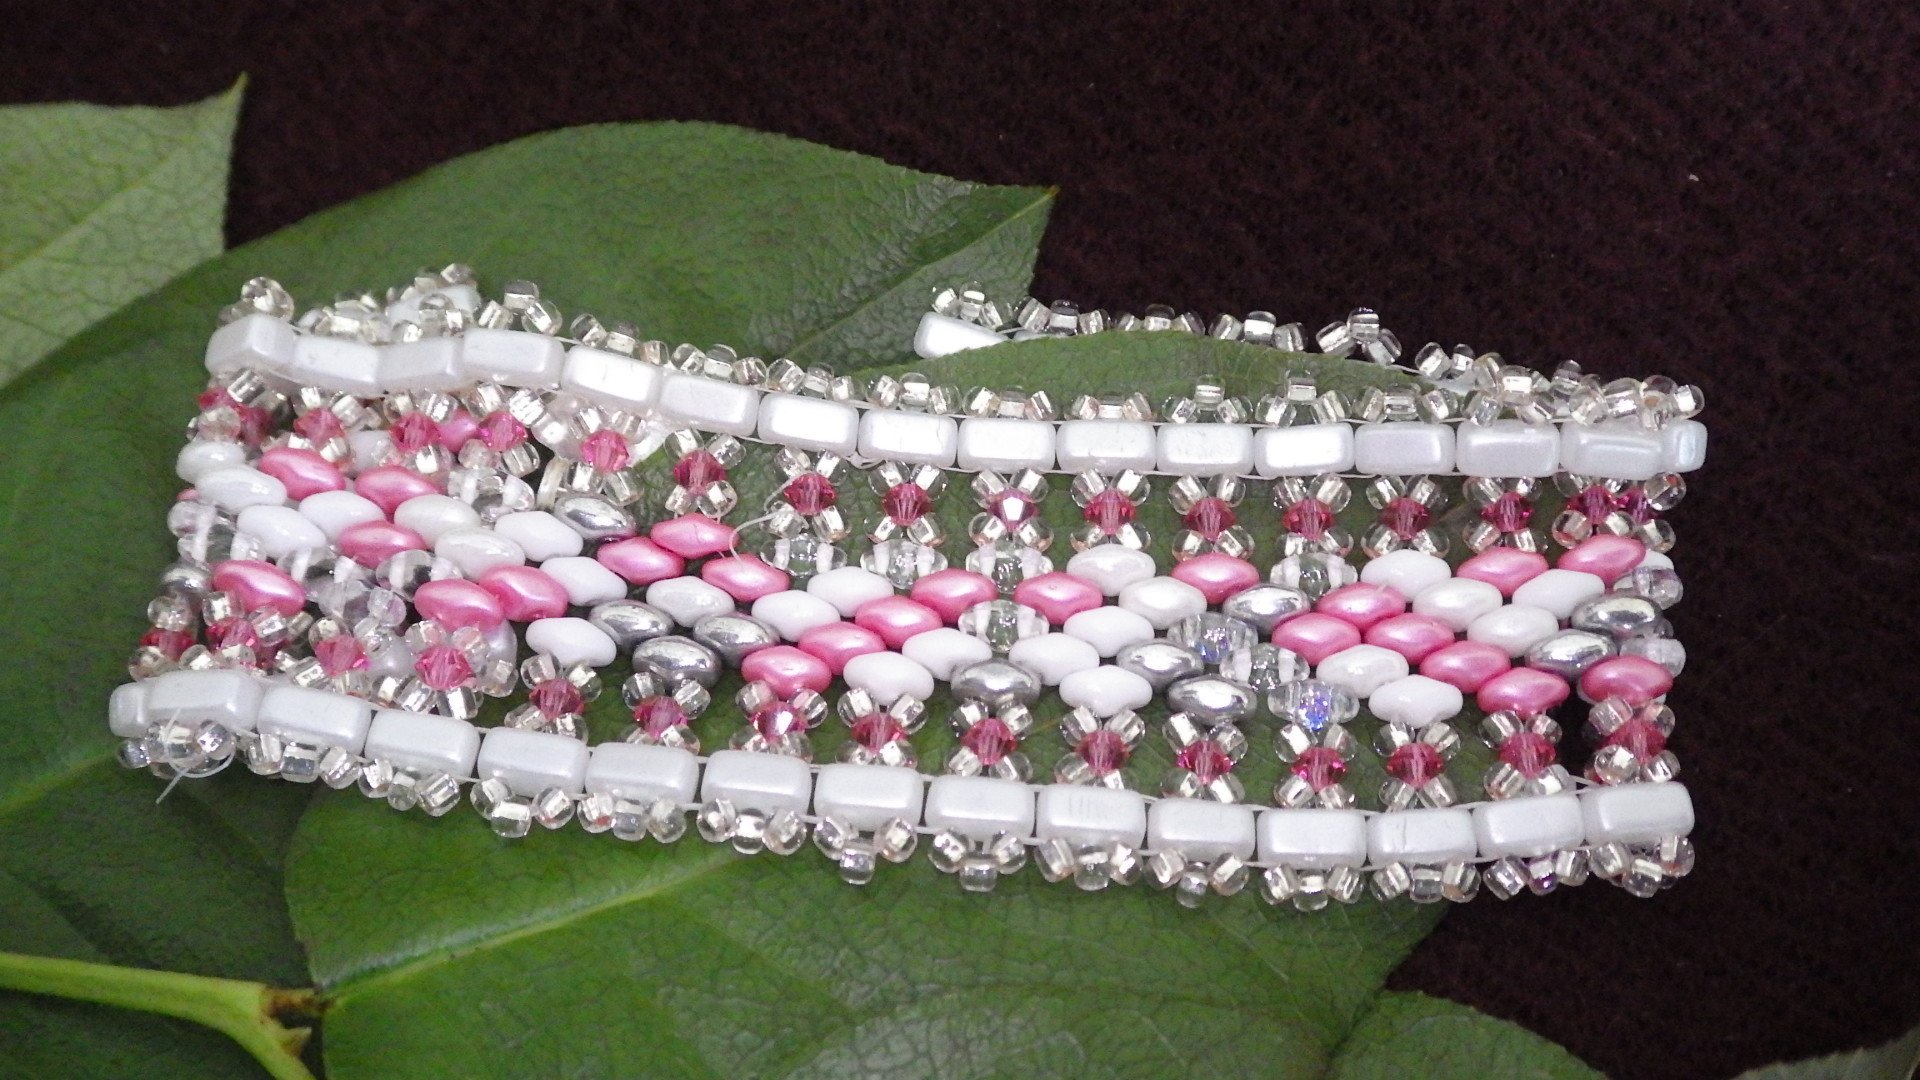  Seed bead bracelet - White edge, silver fringe, pink/white/ clear inside with silver findings  8.5”  $45.00 